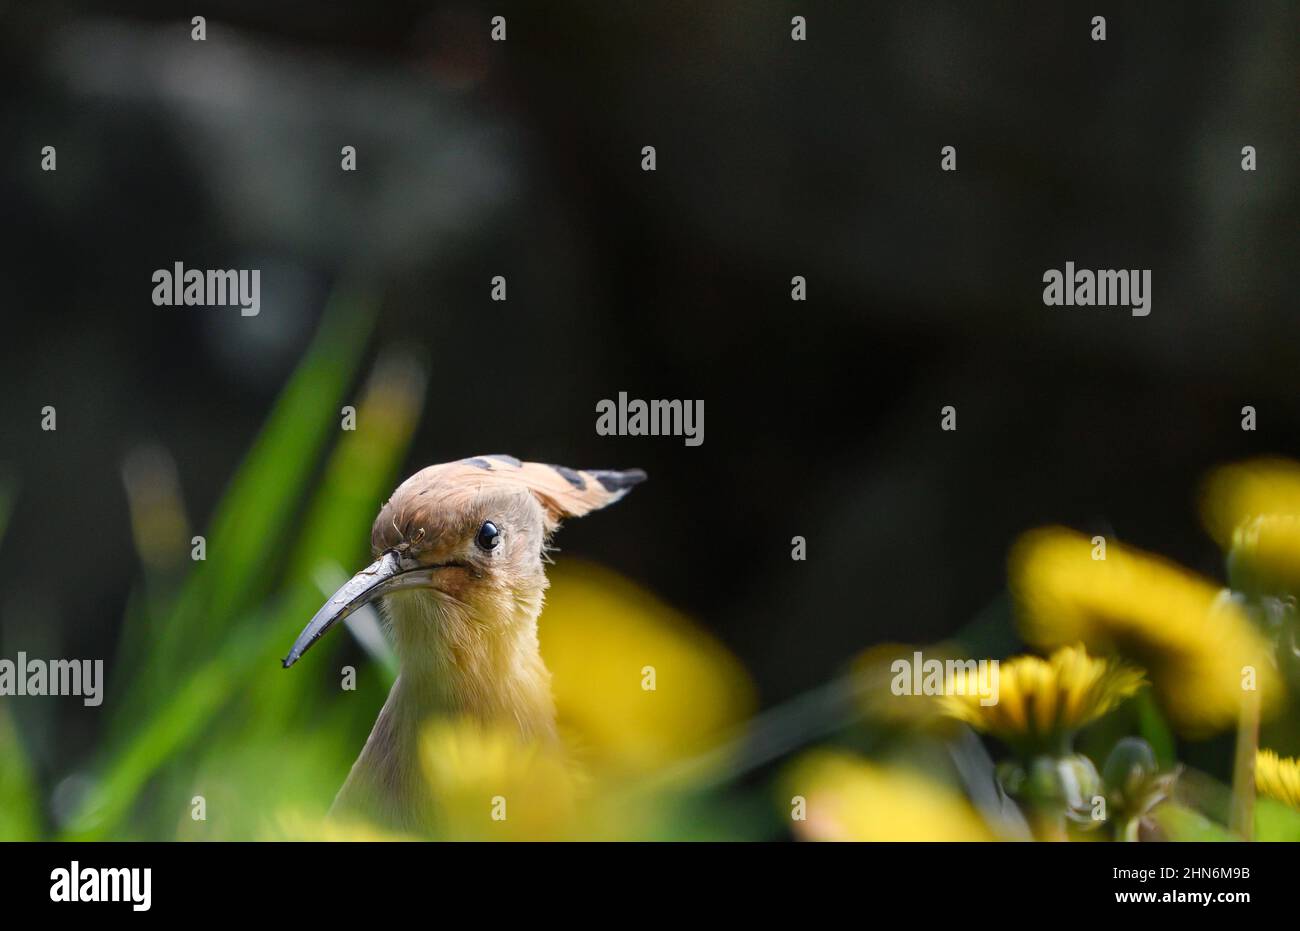 Close-up of a hoopoe among the vegetation Stock Photo